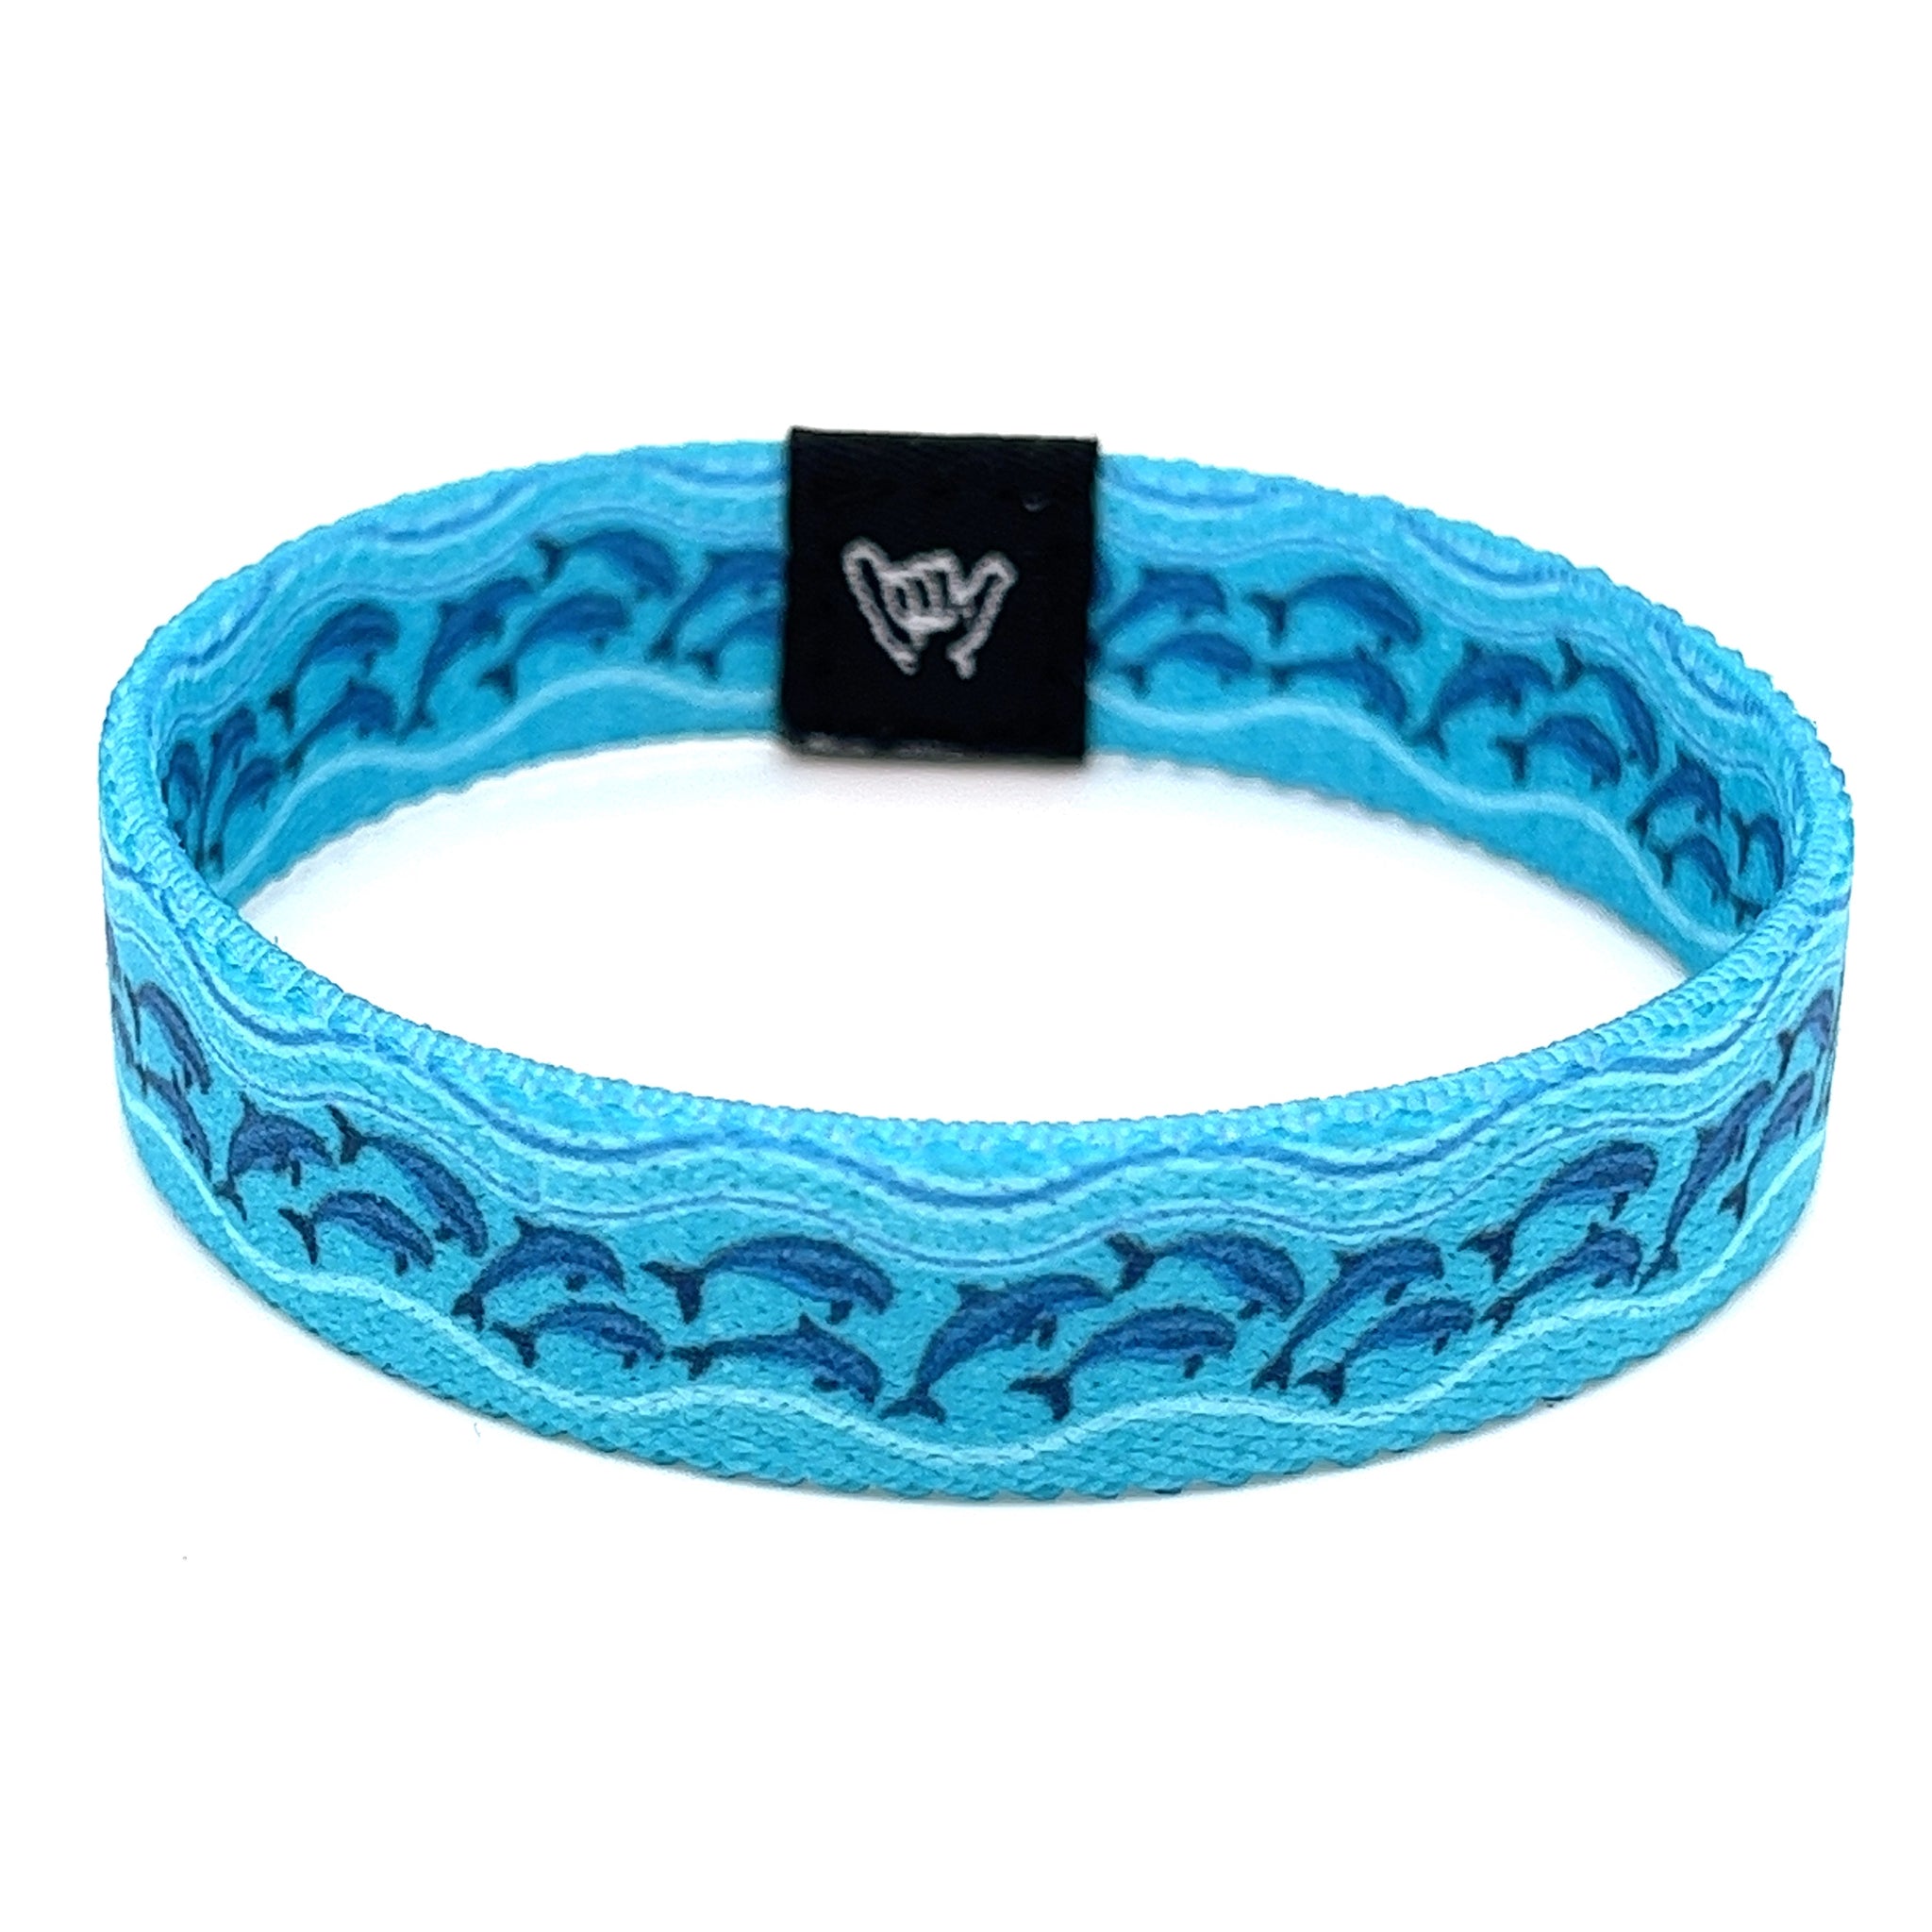 School of Dolphins Wristband Bracelet – Hang Loose Bands